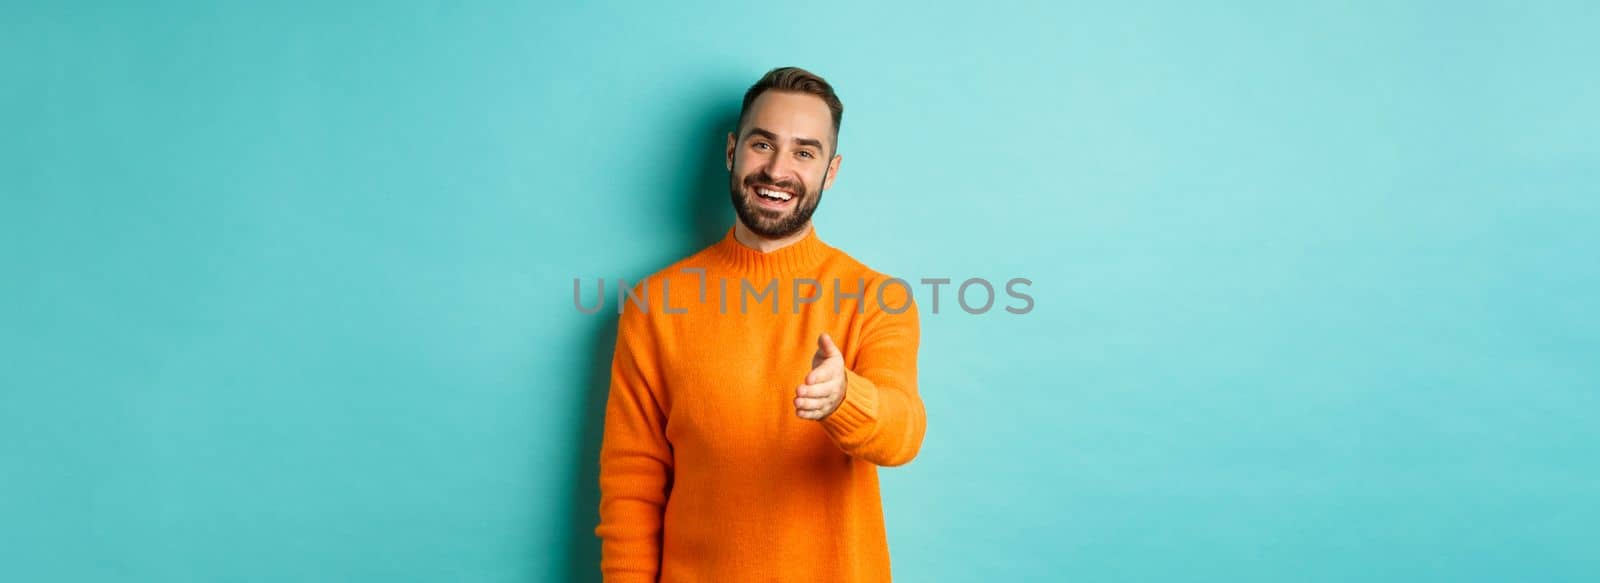 Friendly nice guy extend hand for handshake, greeting you and smiling, saying hello, standing over light blue background.